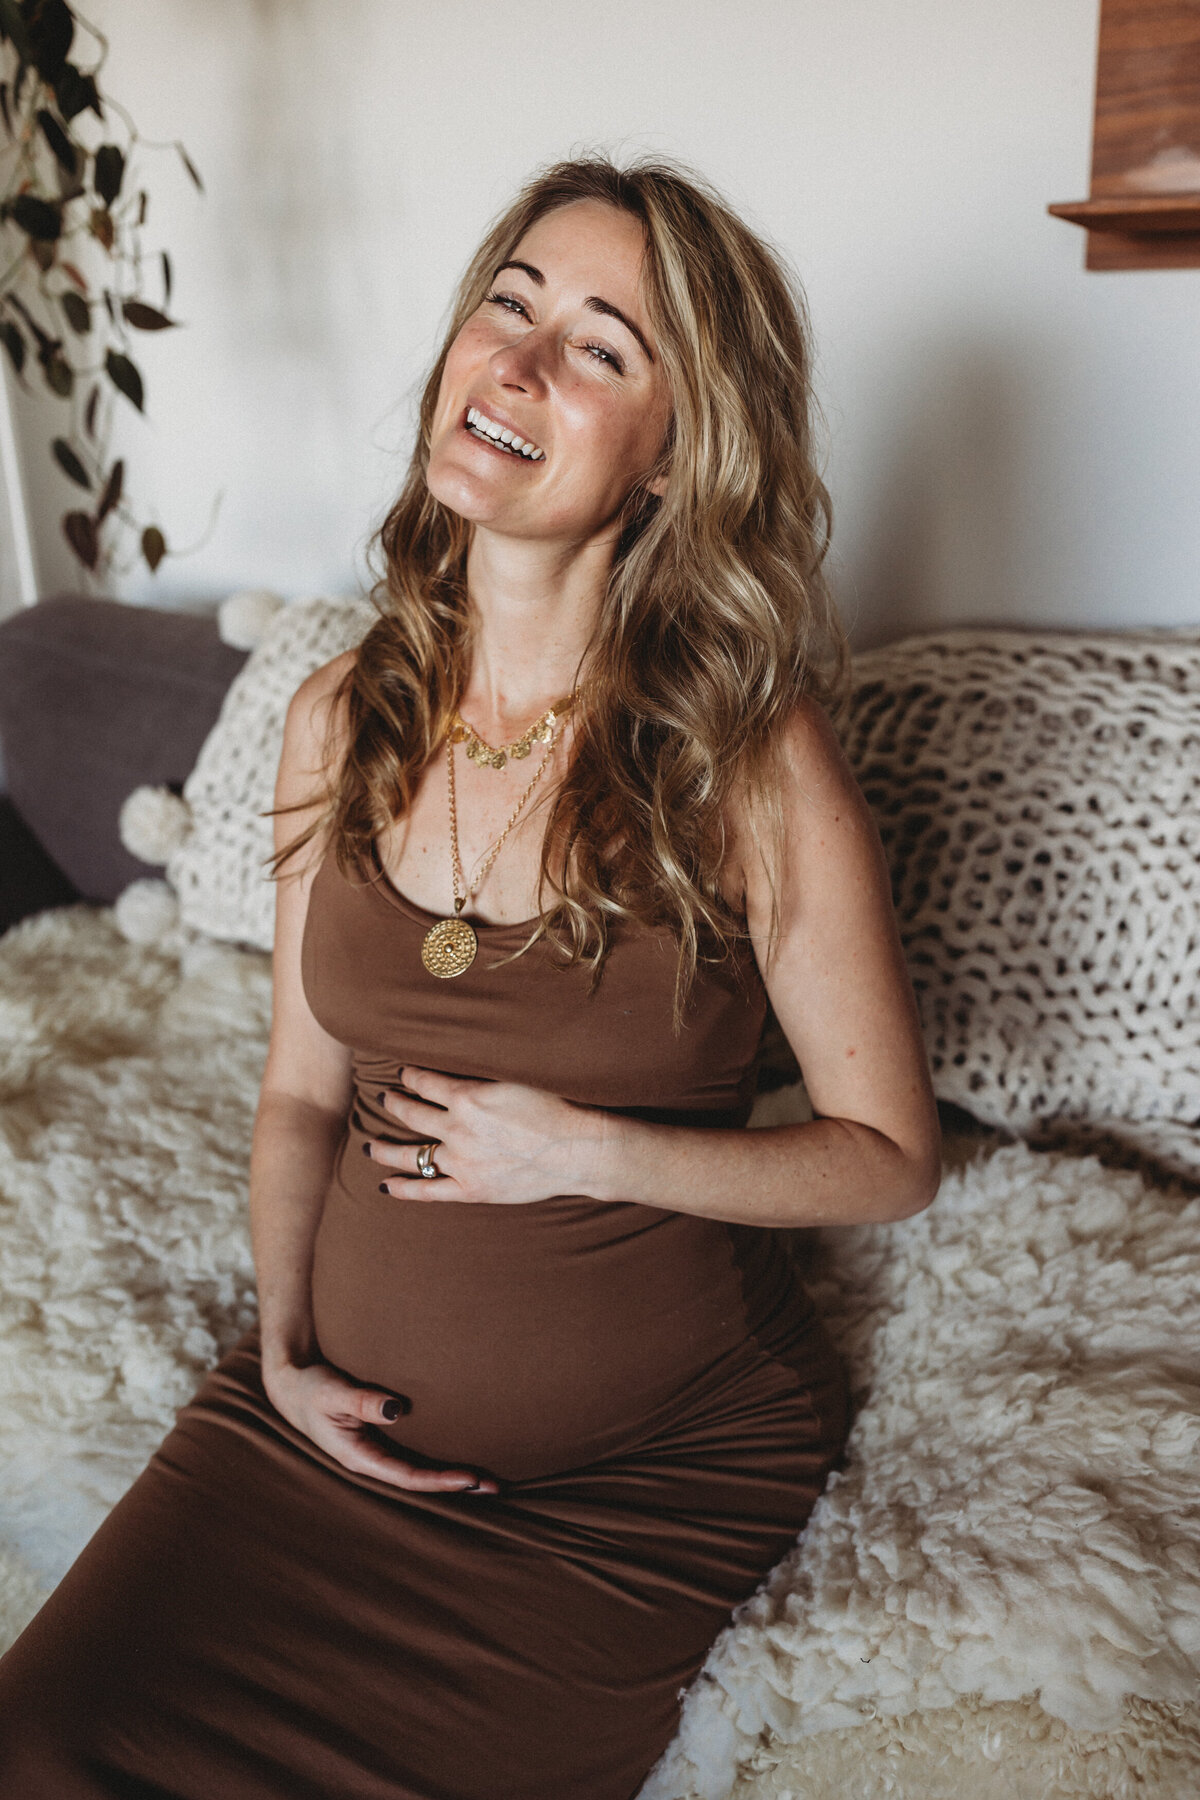 skyler maire photography - in home maternity photos, sausalito maternity photographer, marin county maternity photographer-9747